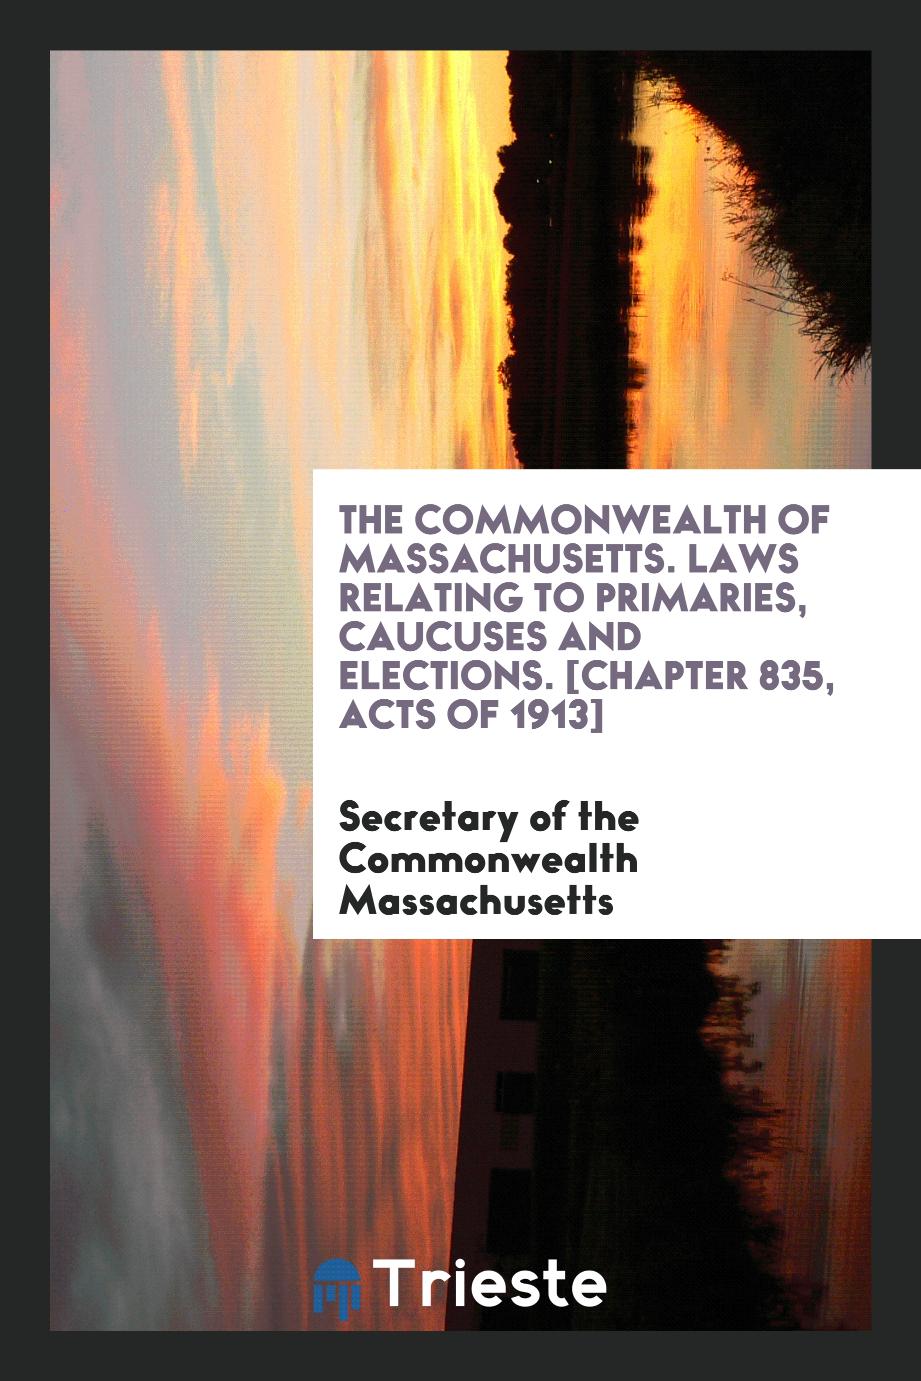 The Commonwealth of Massachusetts. Laws Relating to Primaries, Caucuses and Elections. [Chapter 835, Acts of 1913]